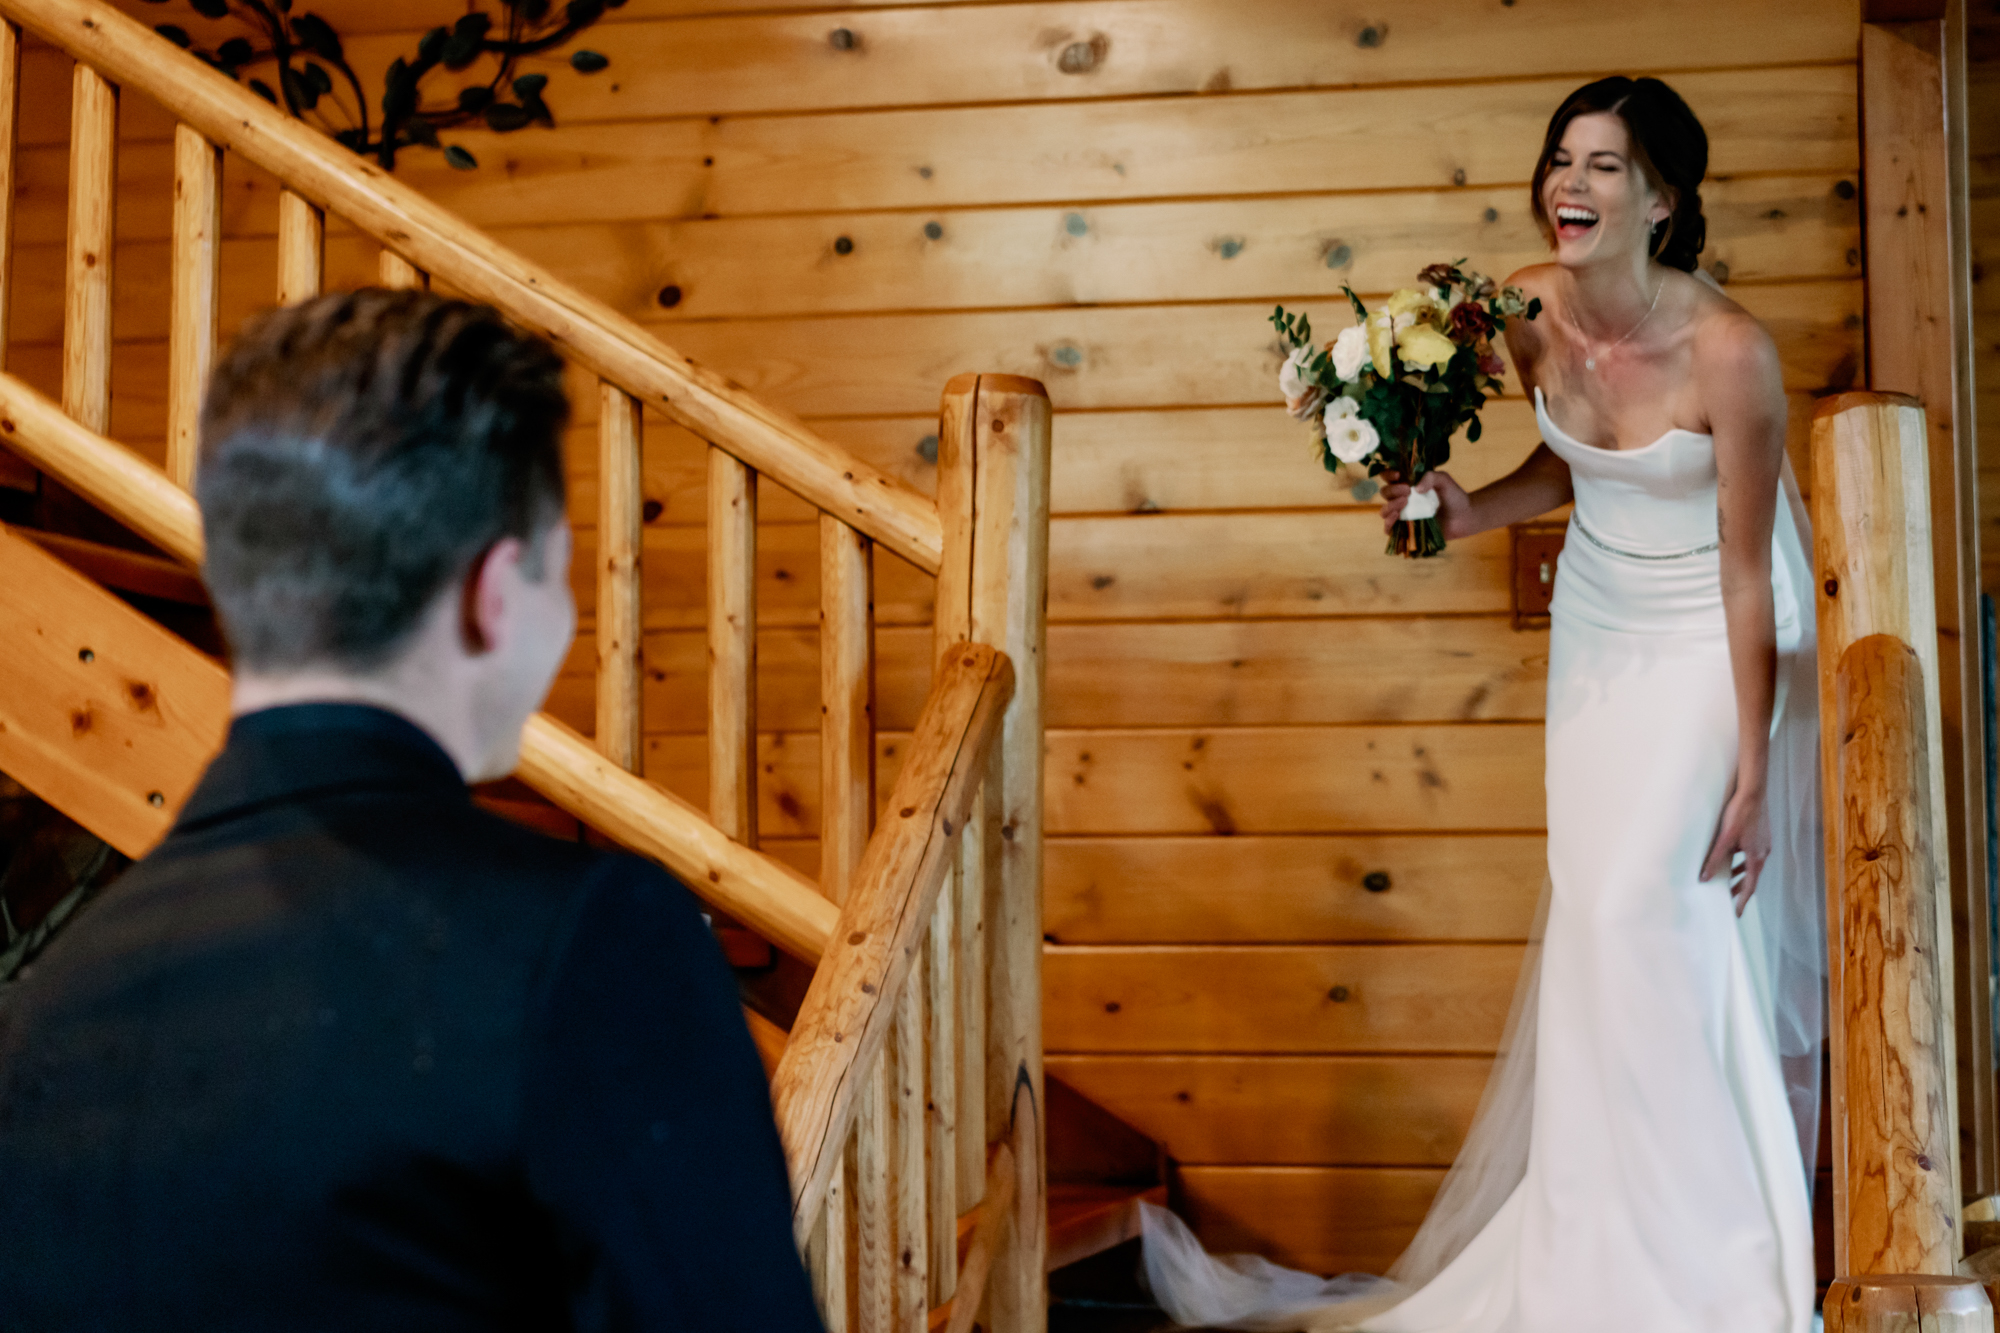 Mountain Springs Lodge weddings: Fletcher and Veronica's first look